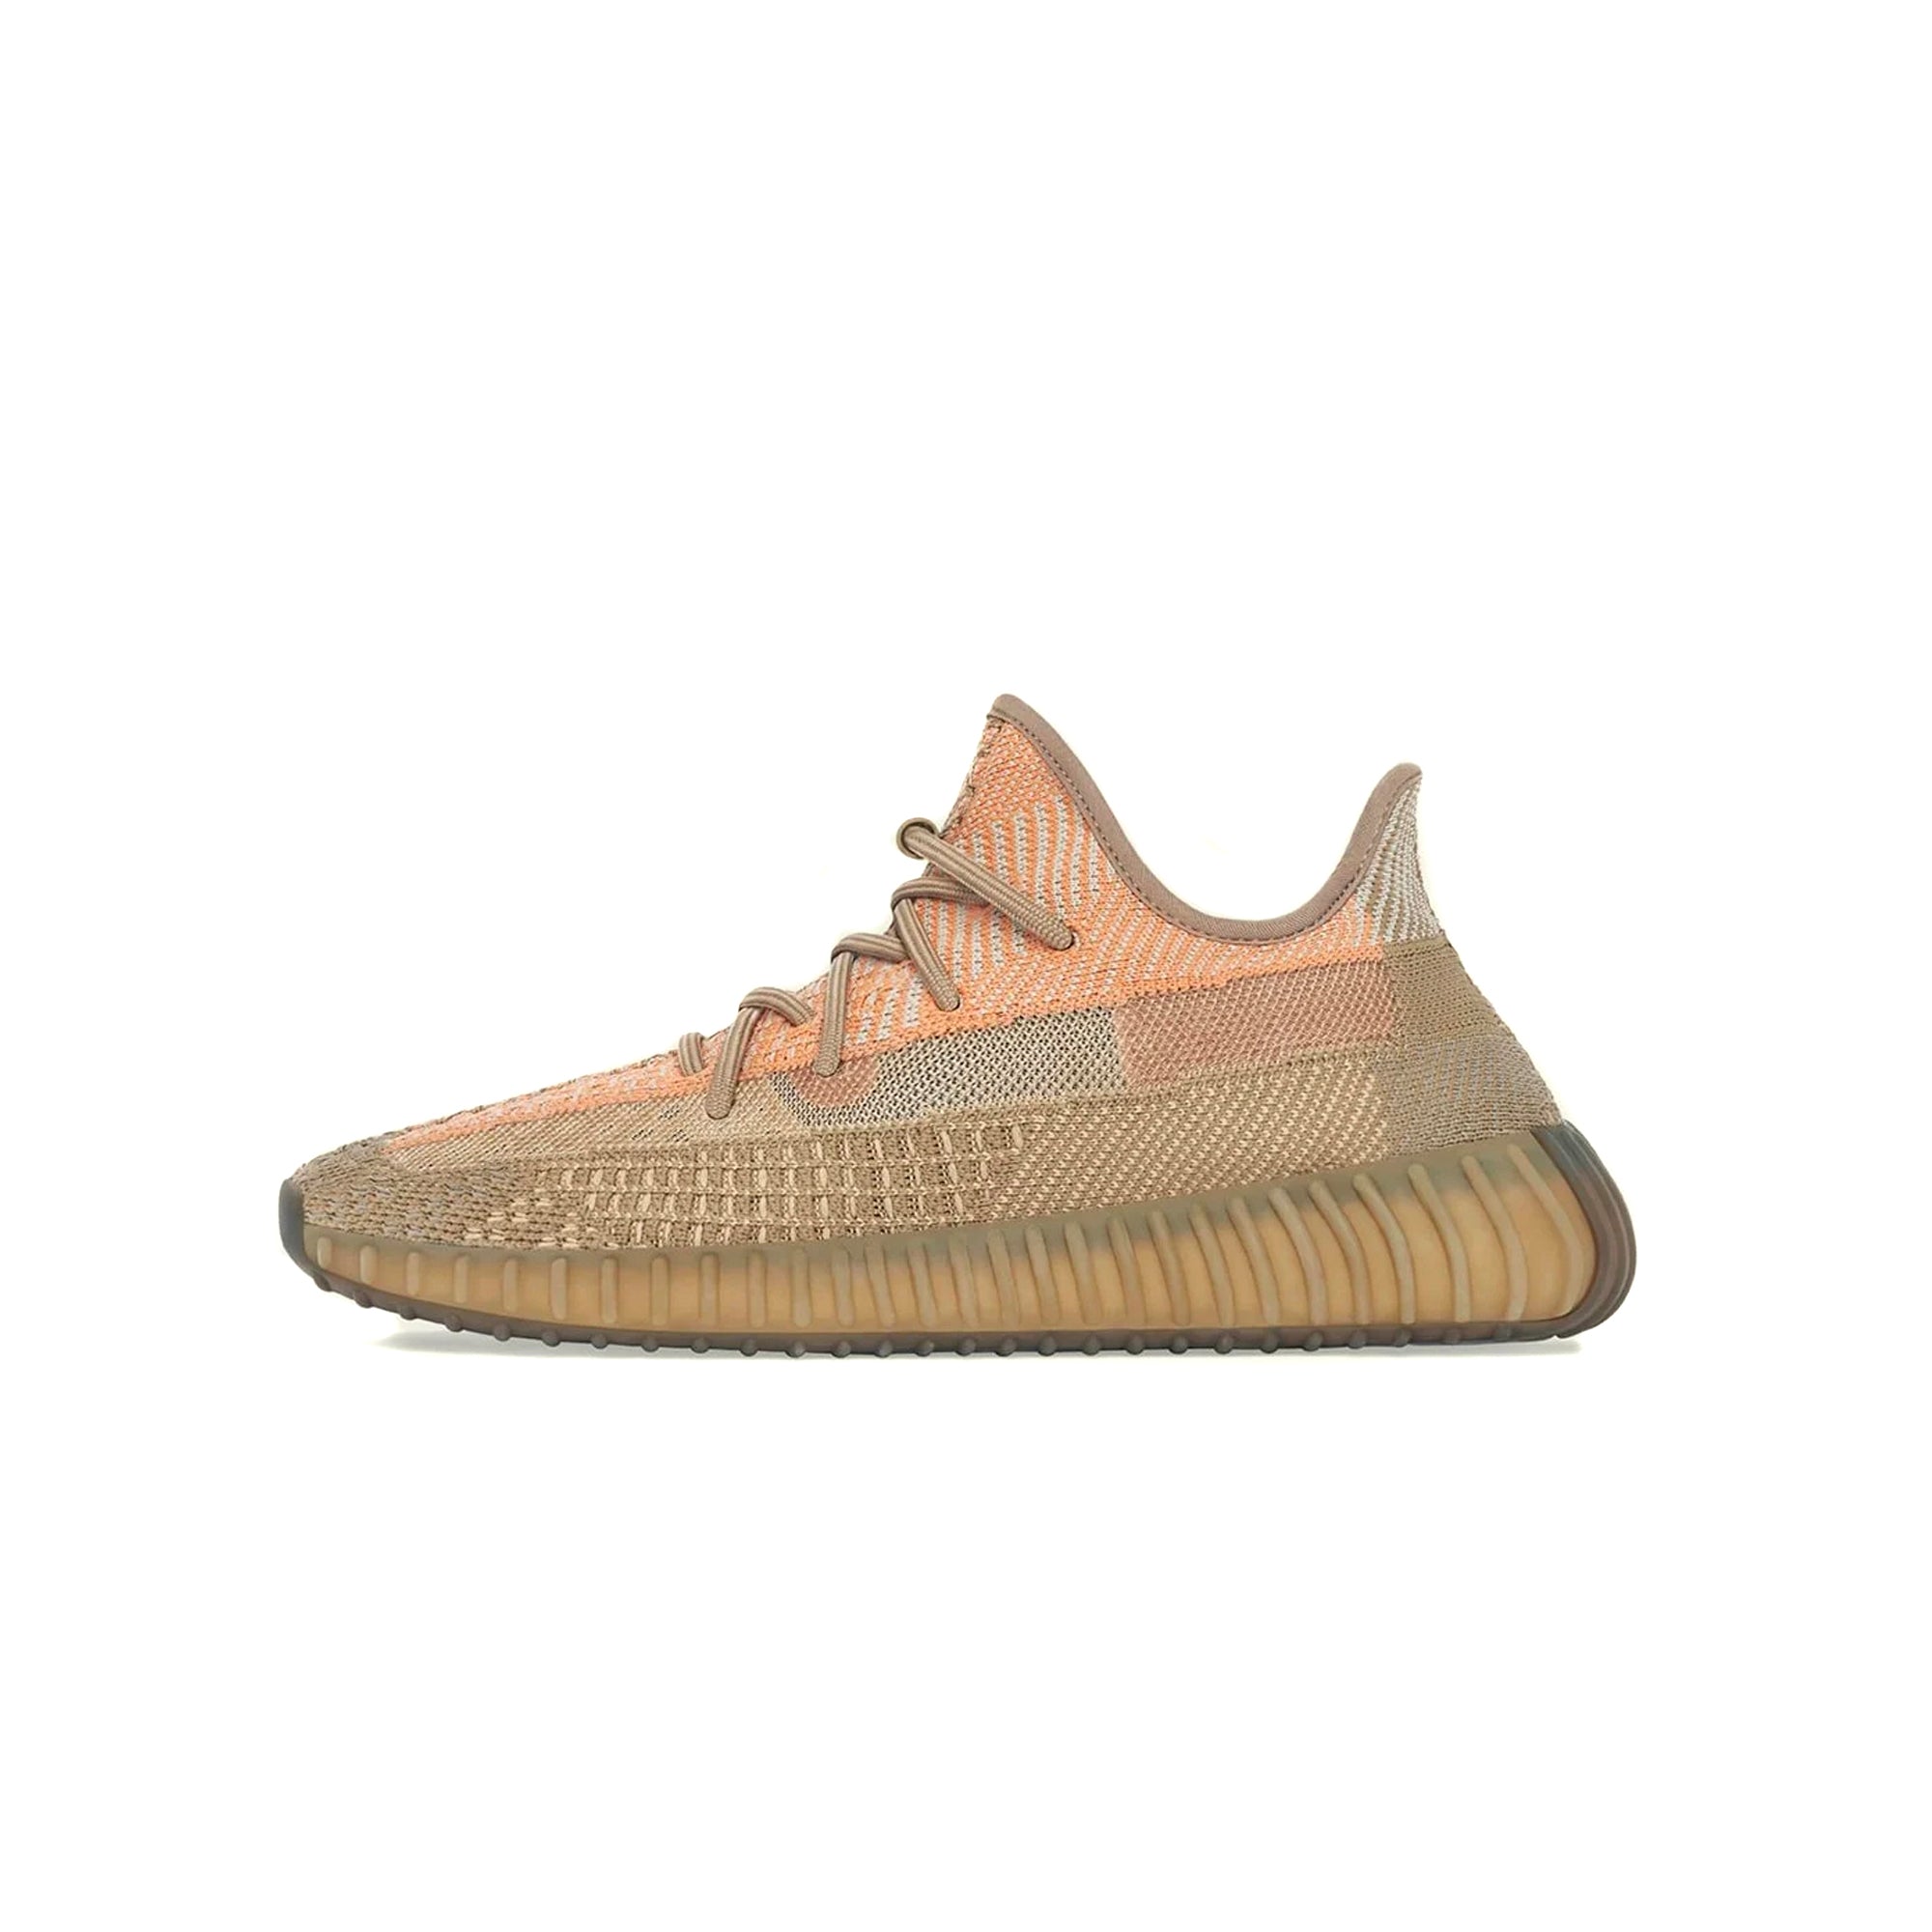 Adidas Mens Yeezy Boost 350 V2 Sand Taupe Shoes